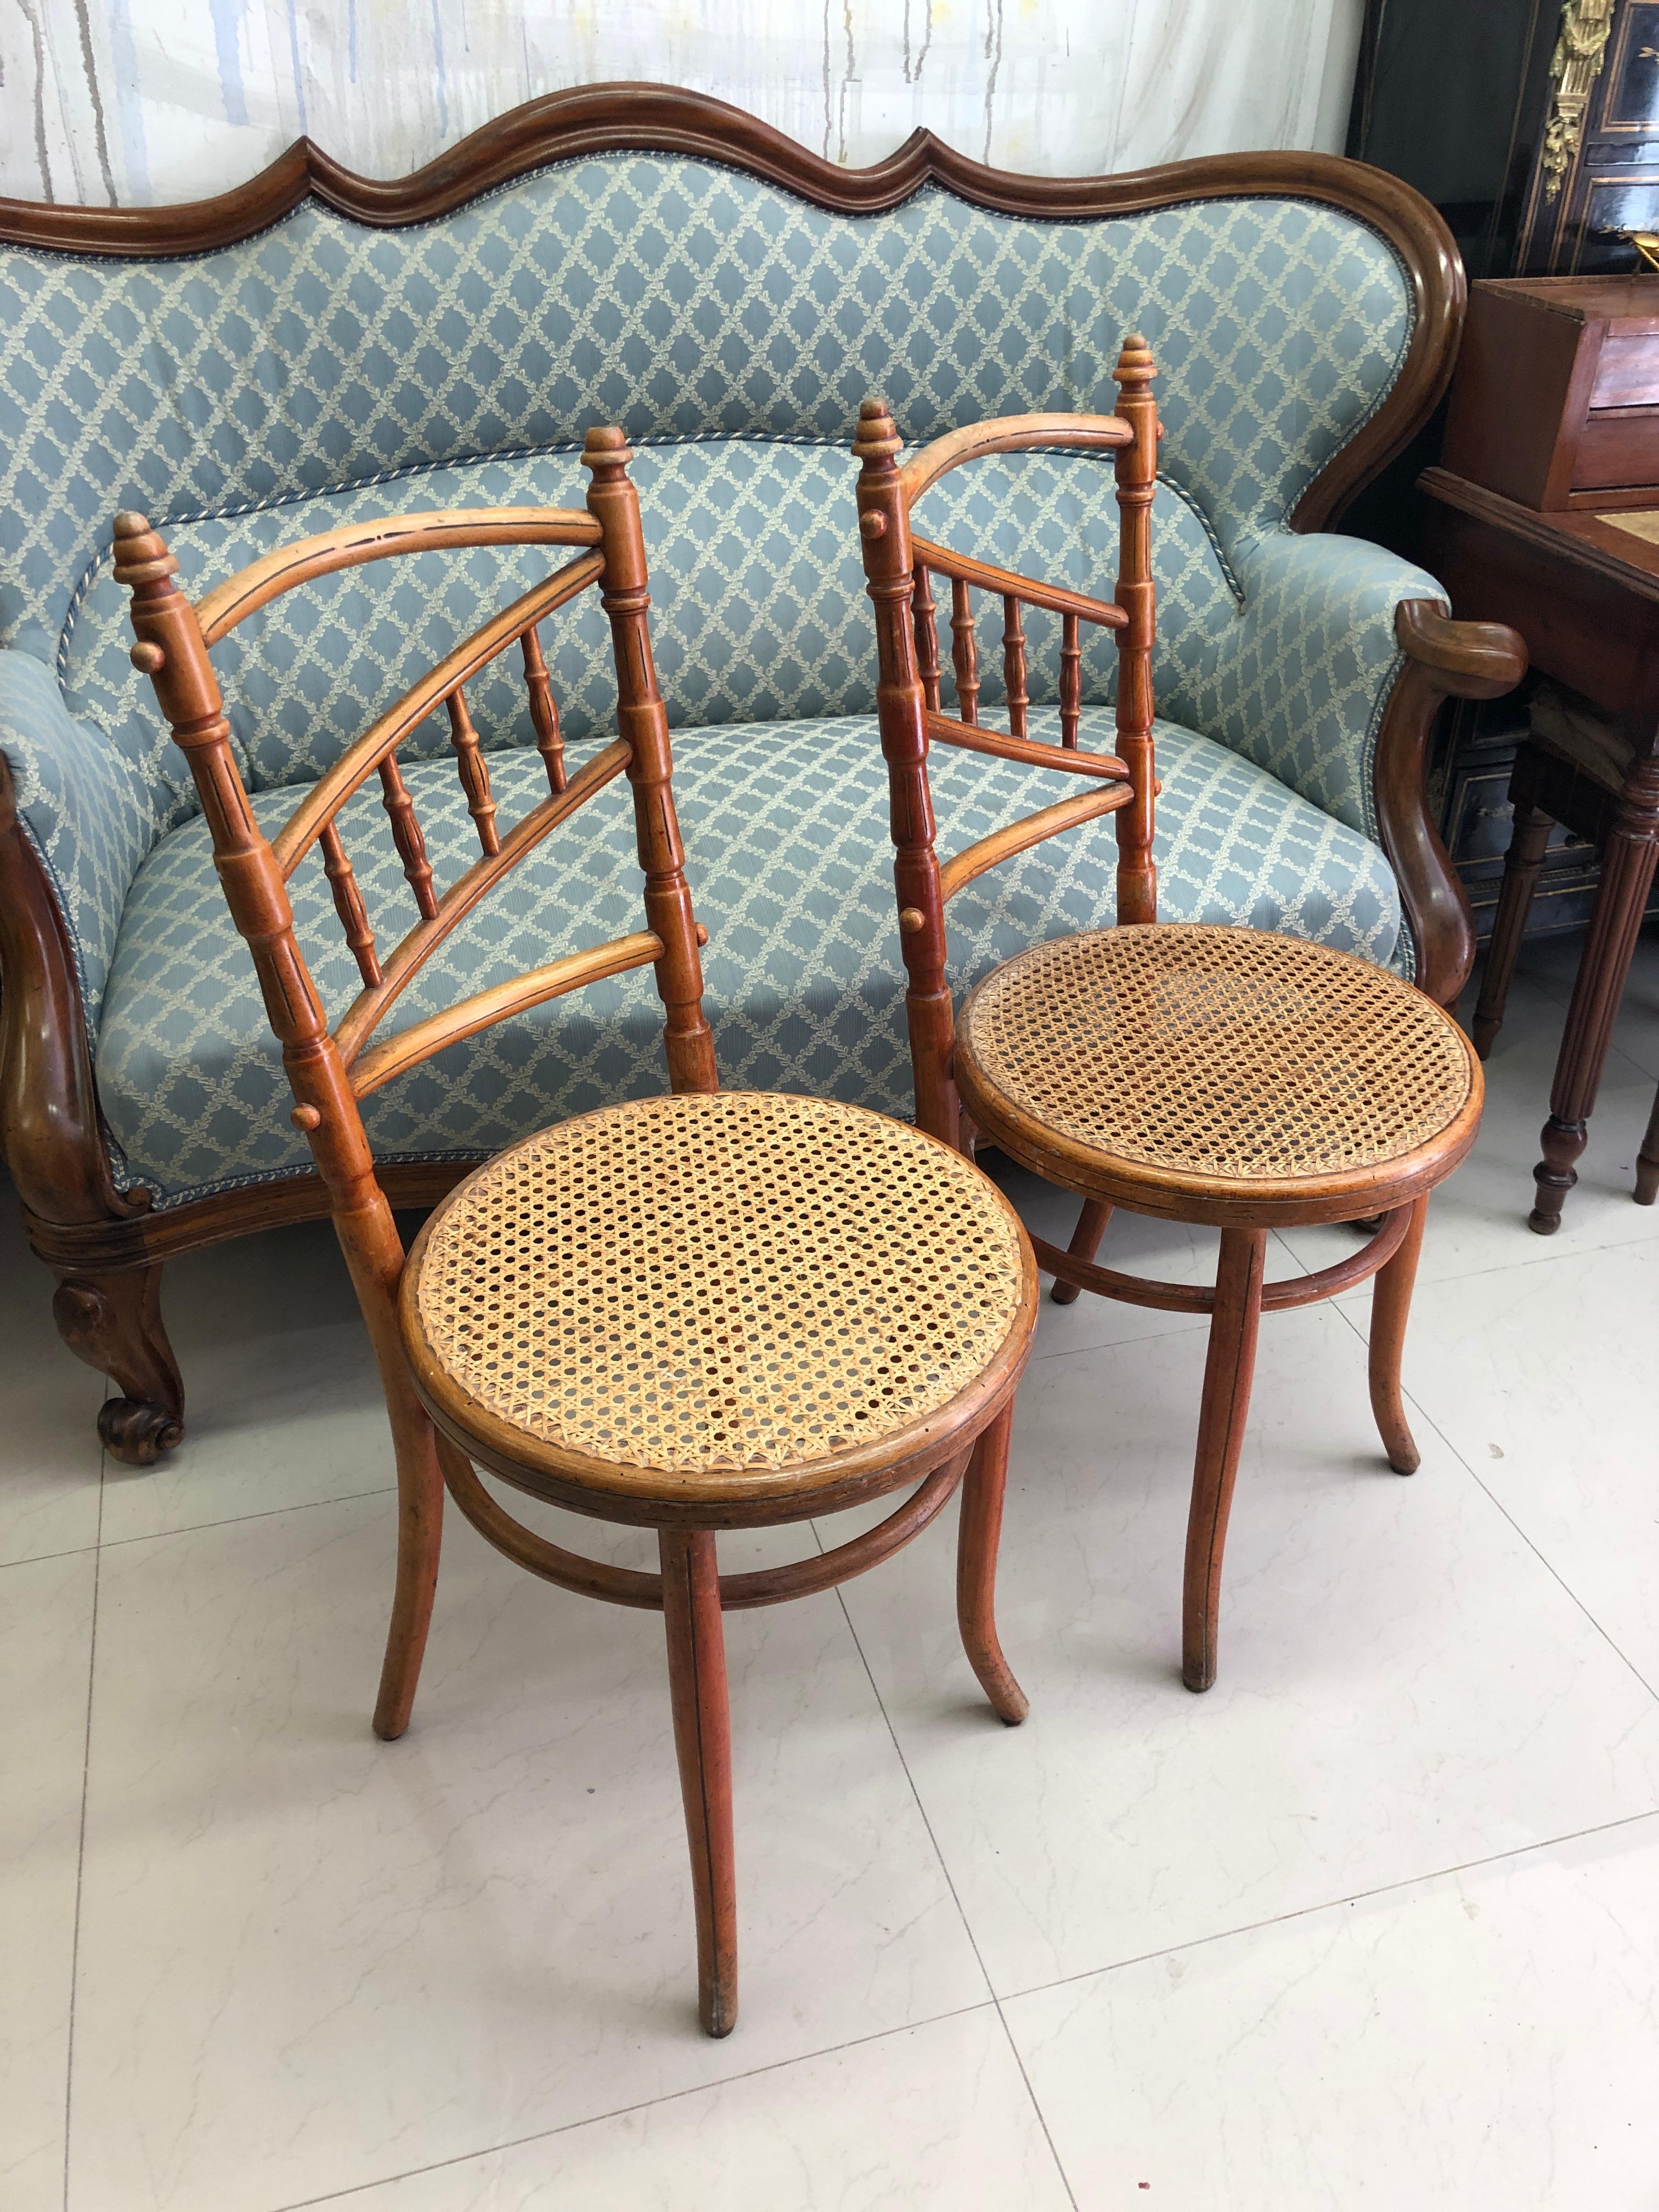 Original Fischel set of five bentwood pieces including a bench, two armchairs and two chairs.
All of them are with original cane seats and are in very good condition.
Wien, circa 1920.